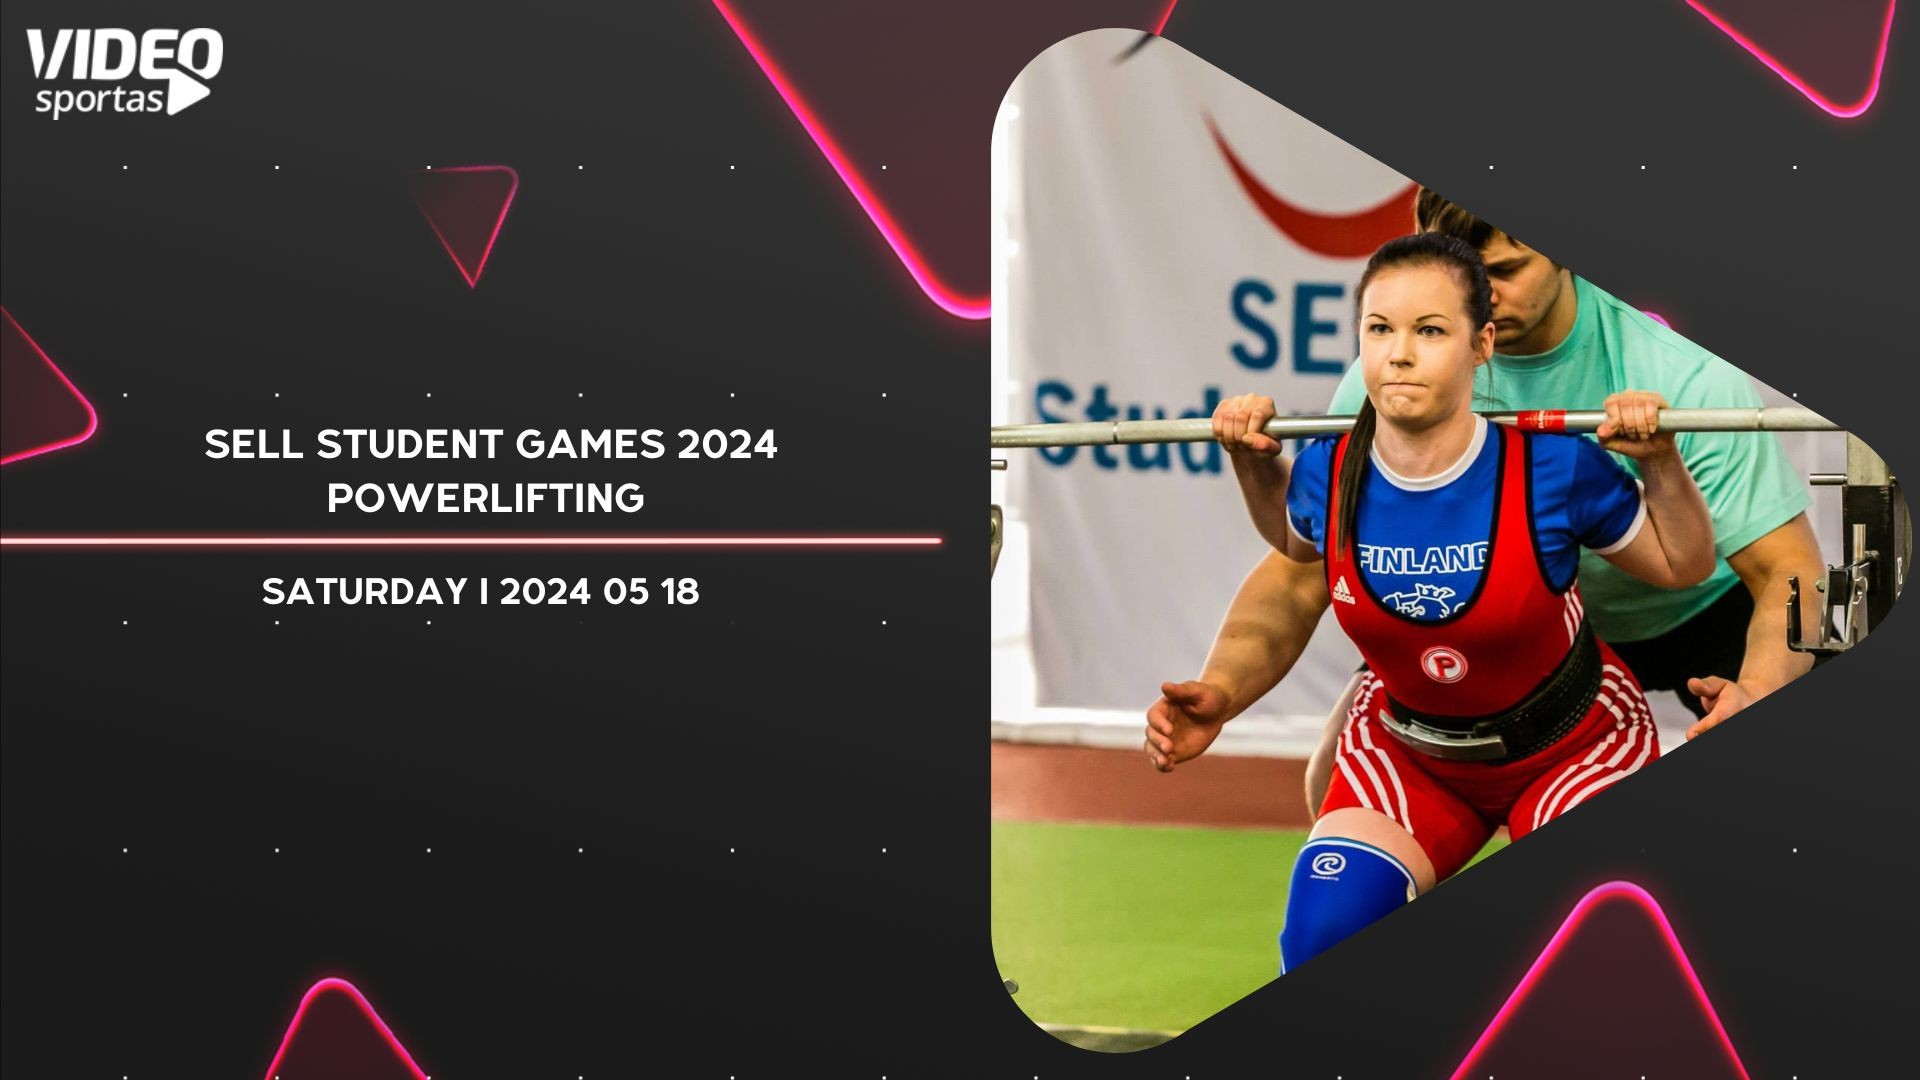 SELL STUDENT GAMES 2024 (POWERLIFTING)